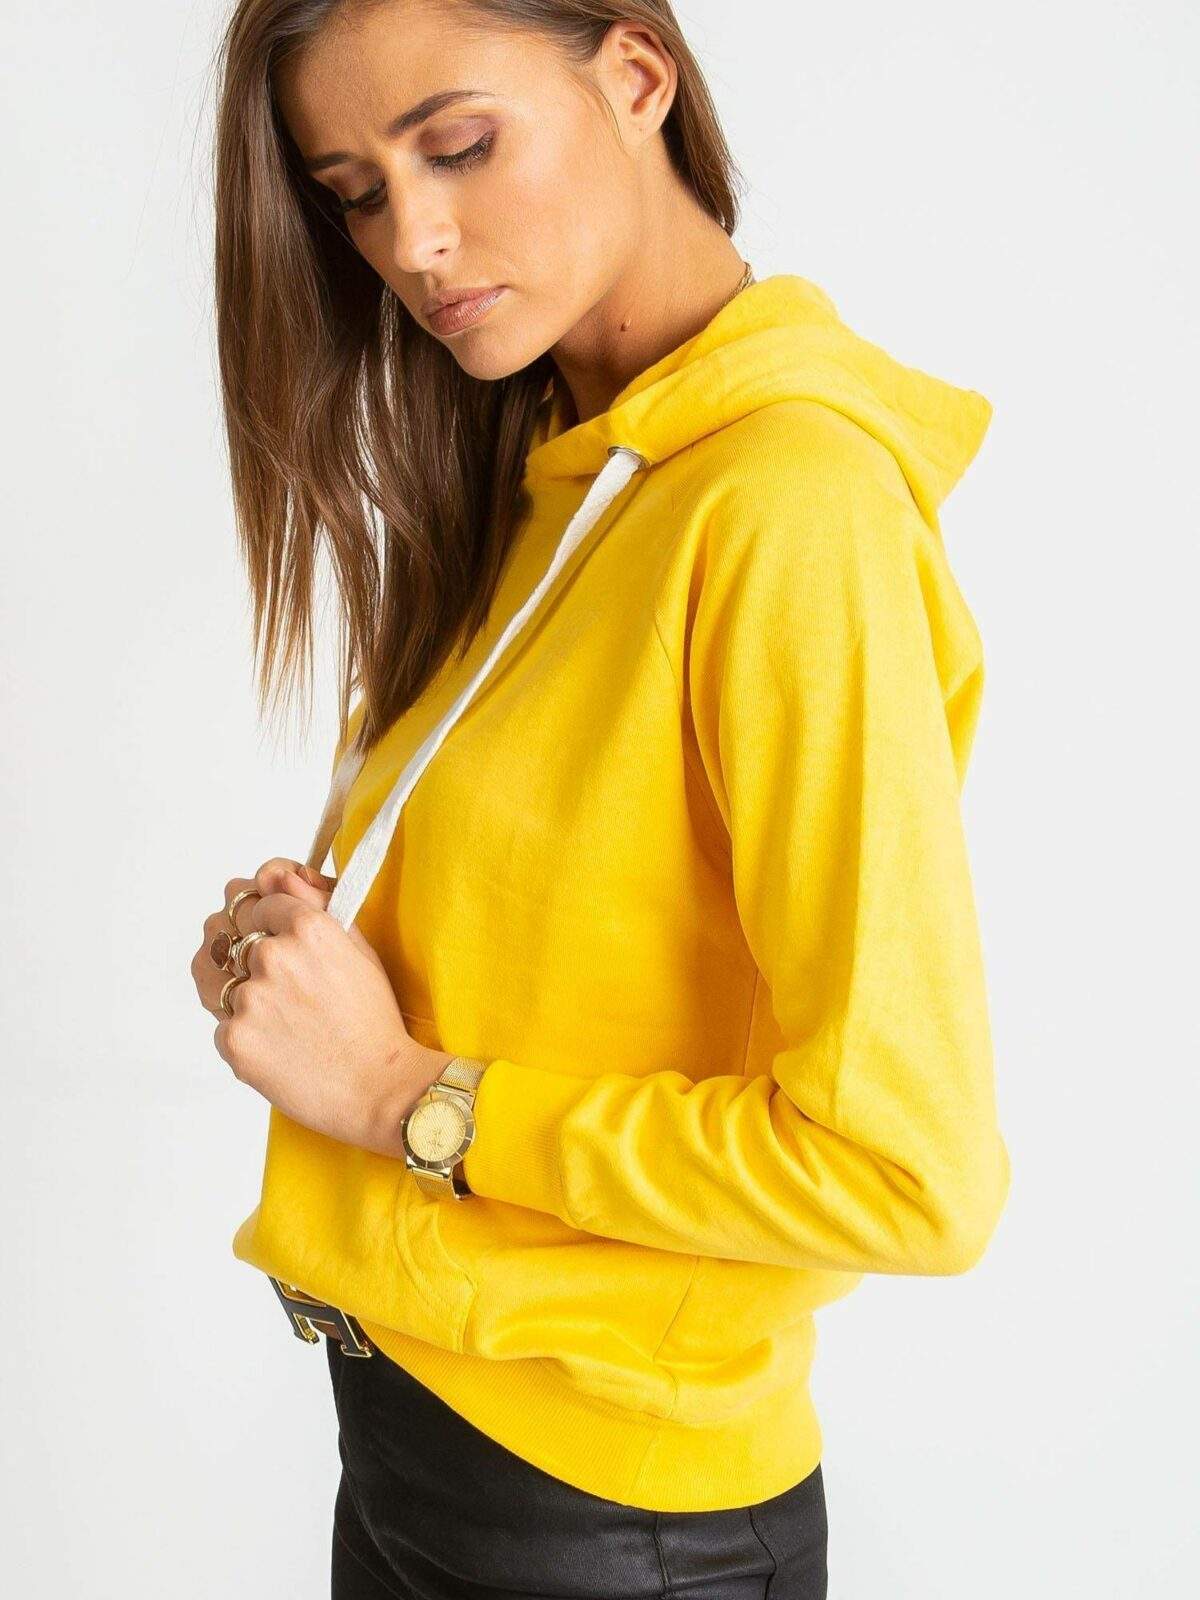 Yellow sweatshirt You don't know